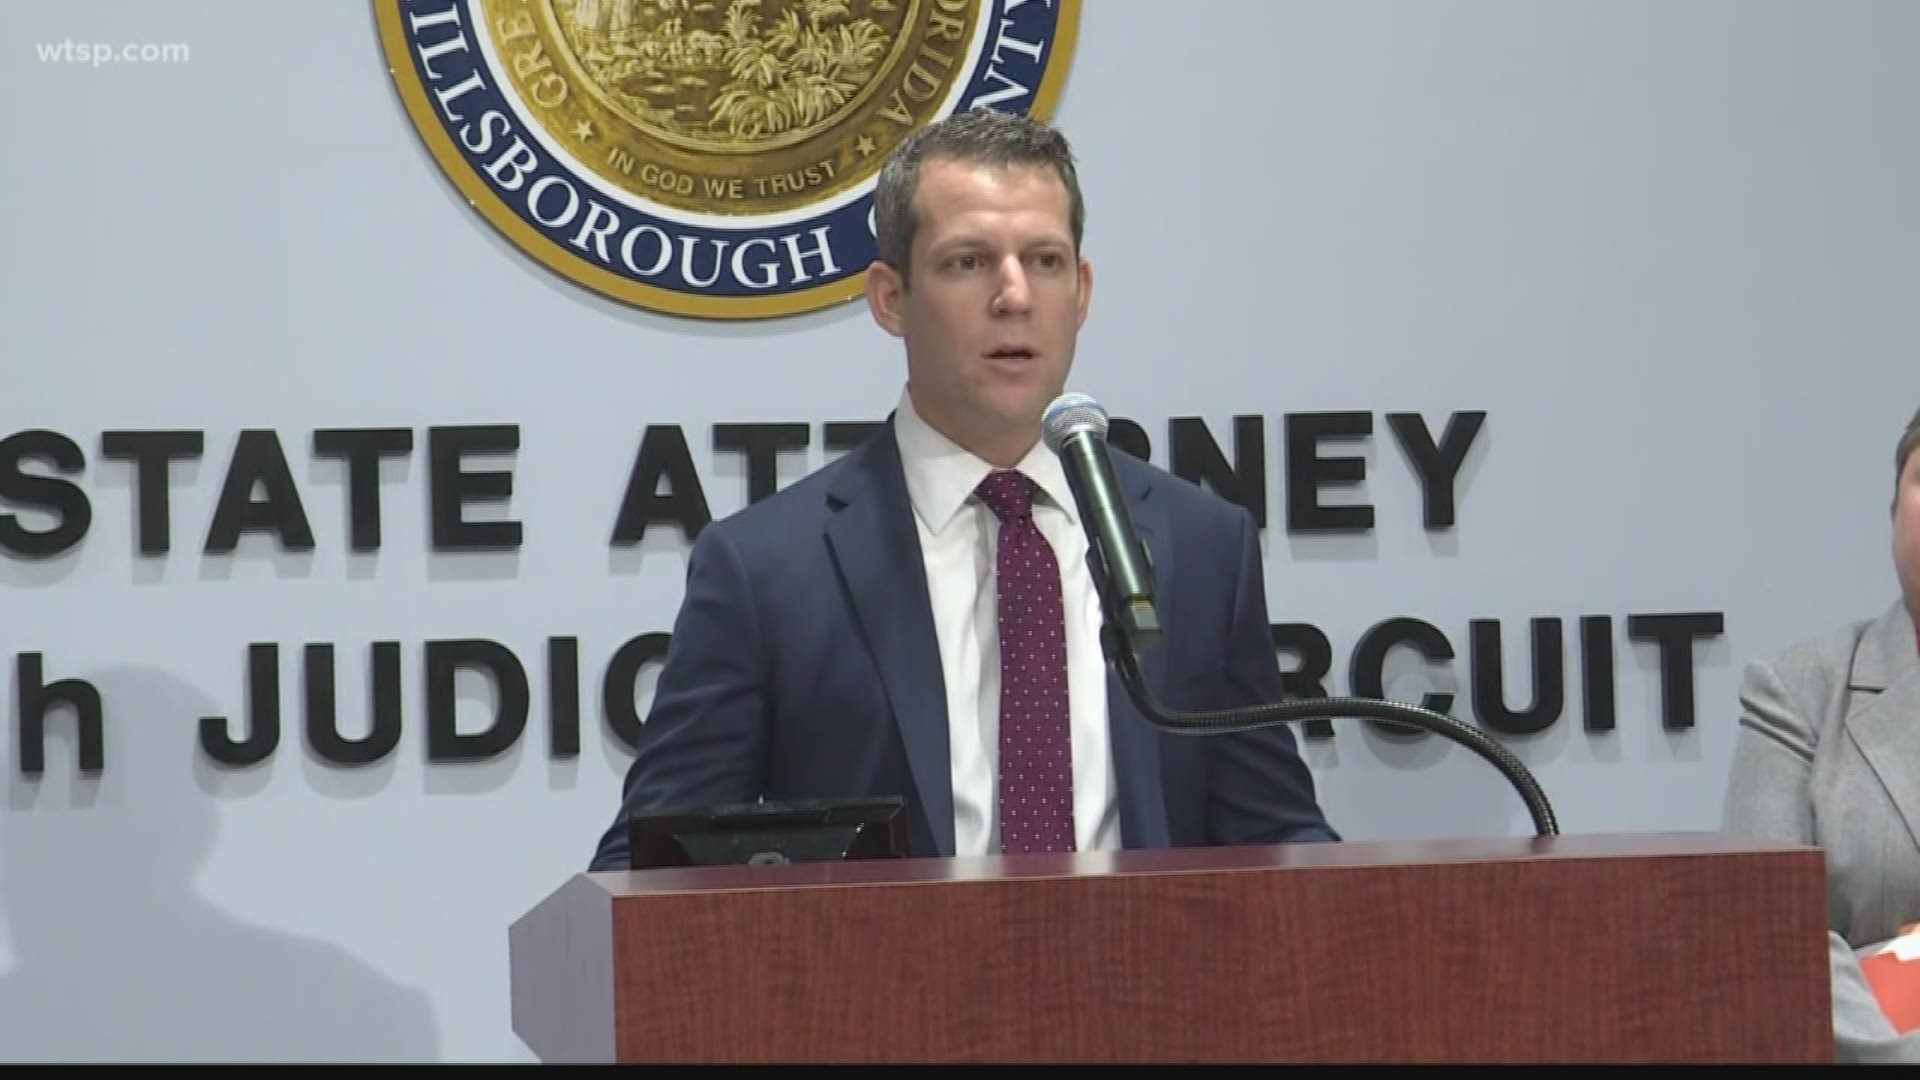 A state attorney announced Wednesday the reversal of several cases as part of an internal investigation after the firing of three Tampa police officers.

Hillsborough County State Attorney Andrew Warren said his office is overturning 17 cases, which include possession of marijuana, possession of a controlled substance, possession of a firearm by a felon or a concealed firearm.

Each of the 17 defendants pleaded guilty, and none are currently in jail. The state attorney’s office is the process of vacating those convictions.

“Our obligation to pursue justice does not end when a case is closed,” Warren said. “As I’ve said before, one wrongful conviction is too many.”

Warren said the decision reflects his office’s commitment to root out wrongful convictions whether a defendant is factually innocent, or whether the methods used to obtain the conviction violated due process.

In May 2019, Tampa Police Chief Brian Dugan announced the firings of three officers and the discipline of seven more. The officers terminated were Mark Landry, John Laretta and Algenis Maceo.

Authorities say the violations include trashing small amounts of drugs, usually misdemeanor amounts of marijuana, rather than making arrests. The officers are accused of not filing reports in cases that they considered too small to worry about. Dugan said they repeatedly turned off their body cameras too.

As part of the months-long investigation, Warren’s office reviewed 225 felony and juvenile cases dating back to January 2018.

Tampa police had to drop five open cases because the officers lost their credibility, Warren said.

“It’s obviously very awkward and embarrassing for me to be here today. The only thing I can to these officers is fire them, and that’s what we’ve done,” Dugan said. “I have taken the time to conduct lengthy roll call sessions with the officers to explain to our current patrolmen and the entire department that this type of behavior is unacceptable and that they better act with character and integrity or else I’ll fire them too.”

Warren and Dugan said there still could be cases that weren’t reviewed in the investigation. They asked anyone to come forward if they feel like they were wrongfully convicted due to one of those officers’ involvement.